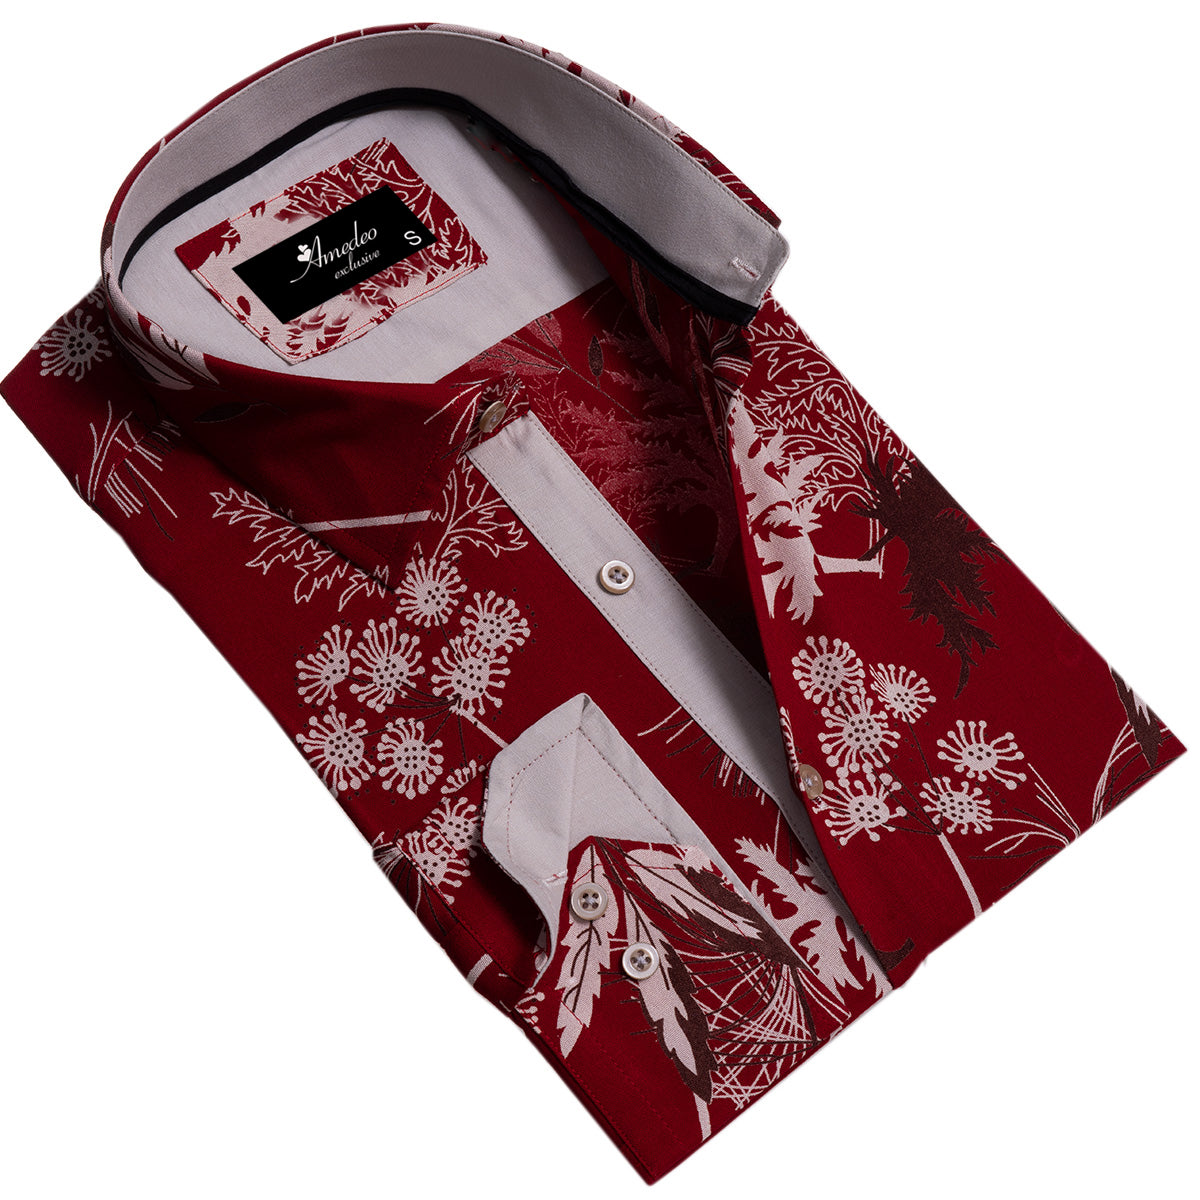 Dark Red Mens Slim Fit Designer Dress Shirt - tailored Cotton Shirts for Work and Casual Wear